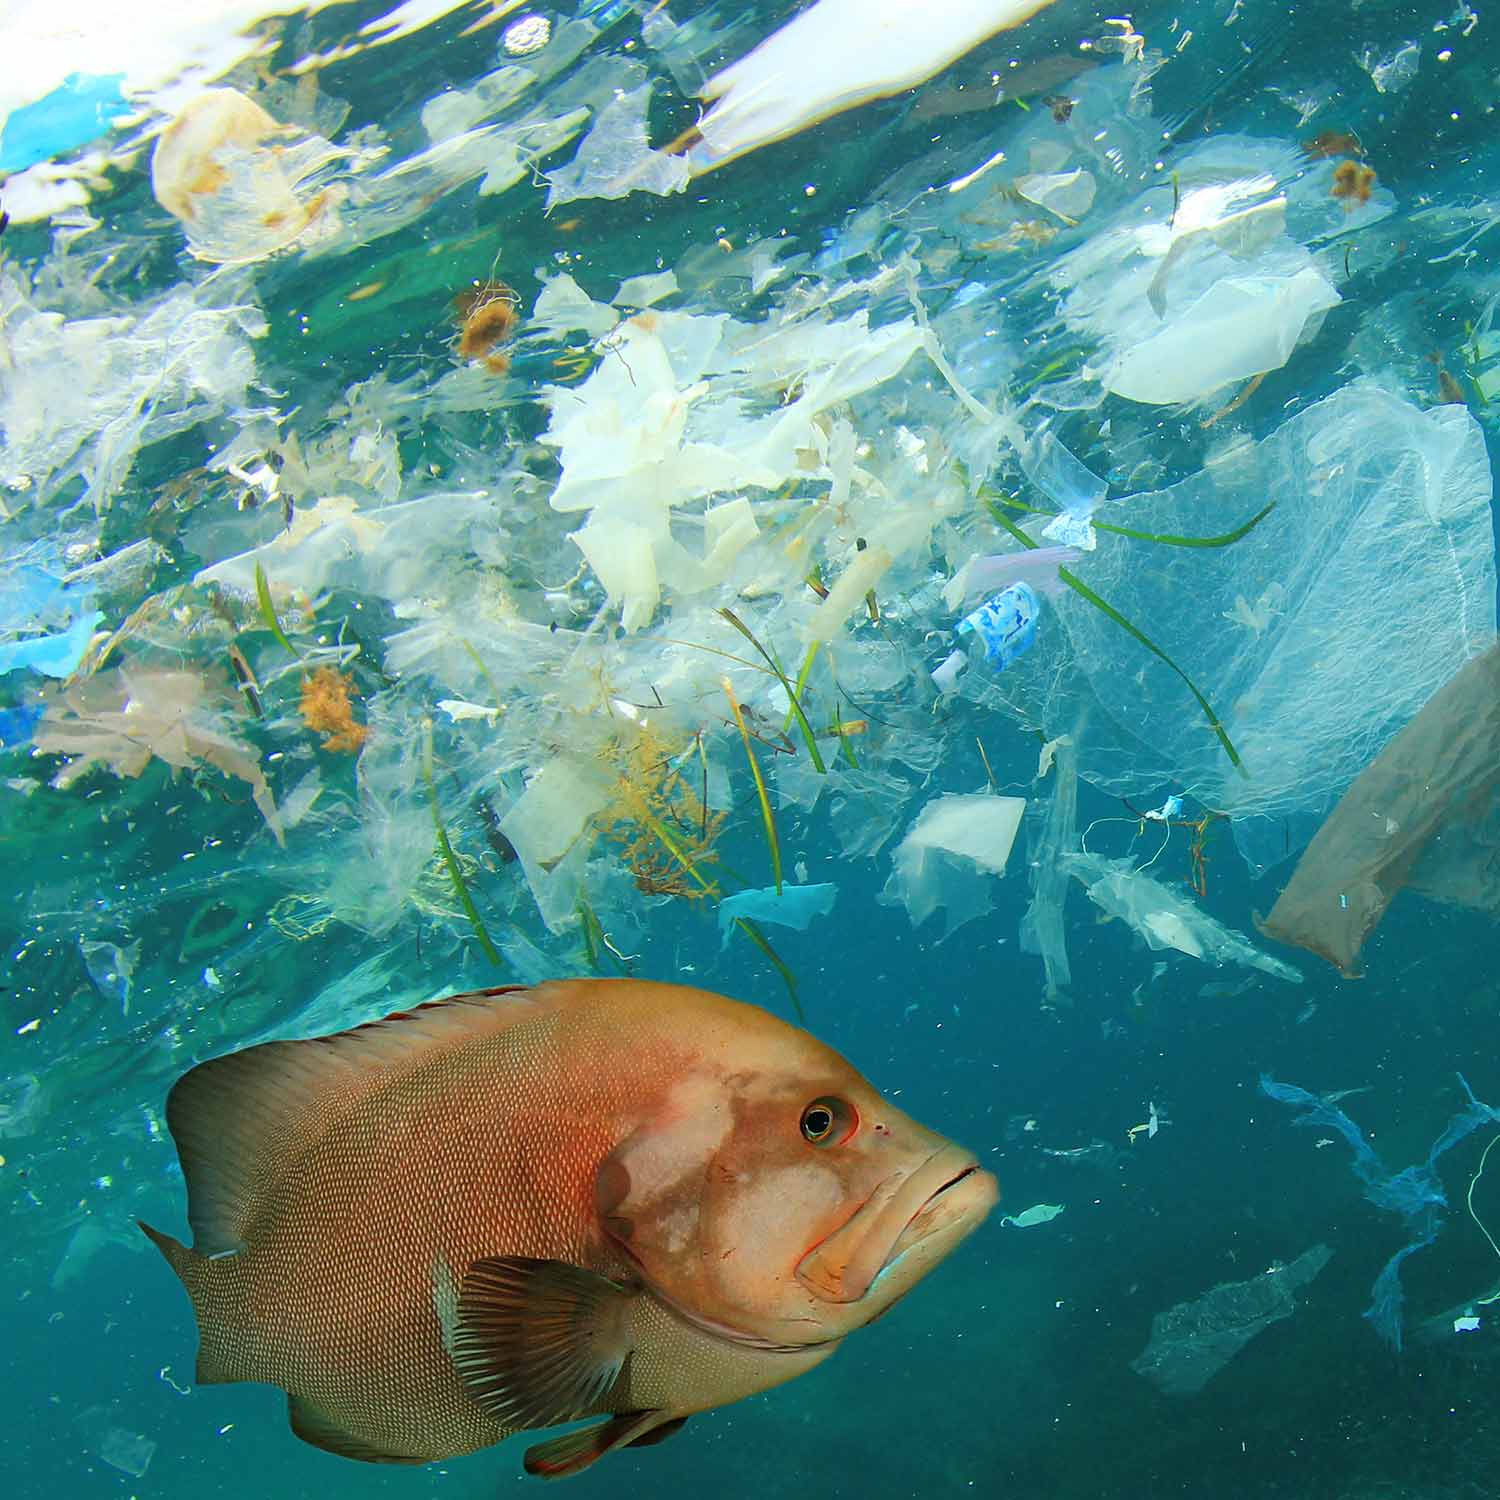 Image of fish swimming with plastic in water